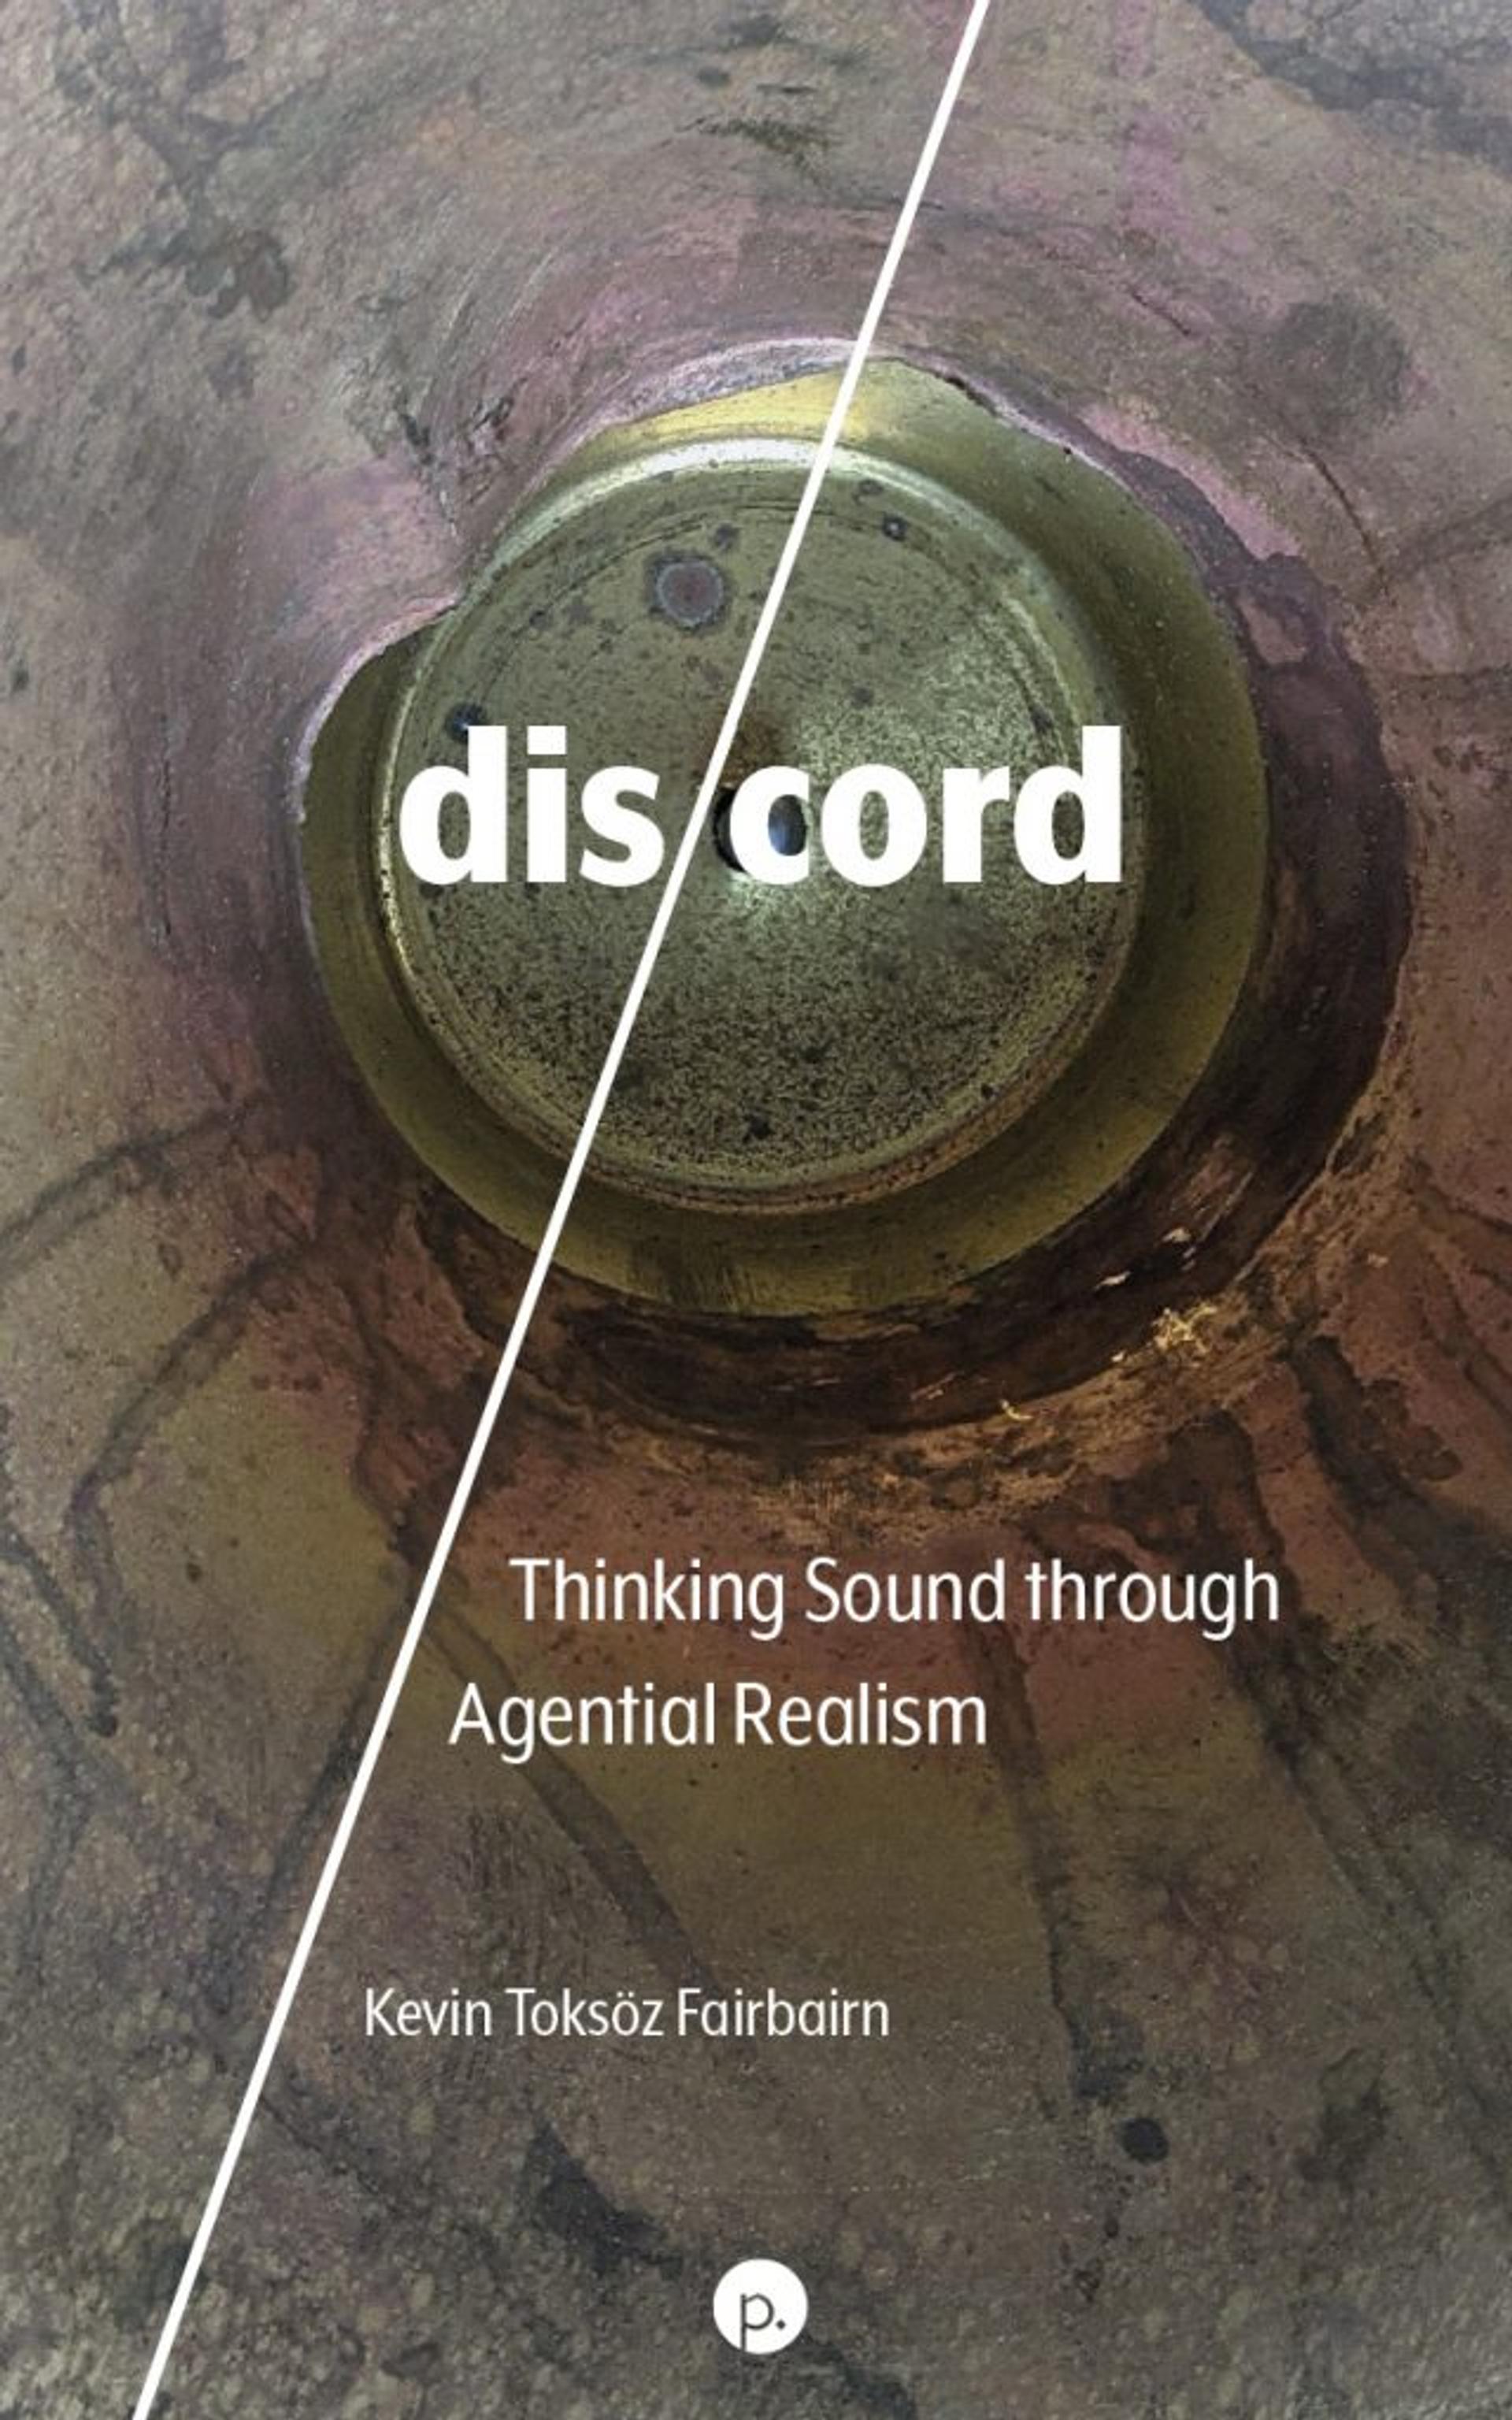 Cover of book titled dis/cord: Thinking Sound through Agential Realism